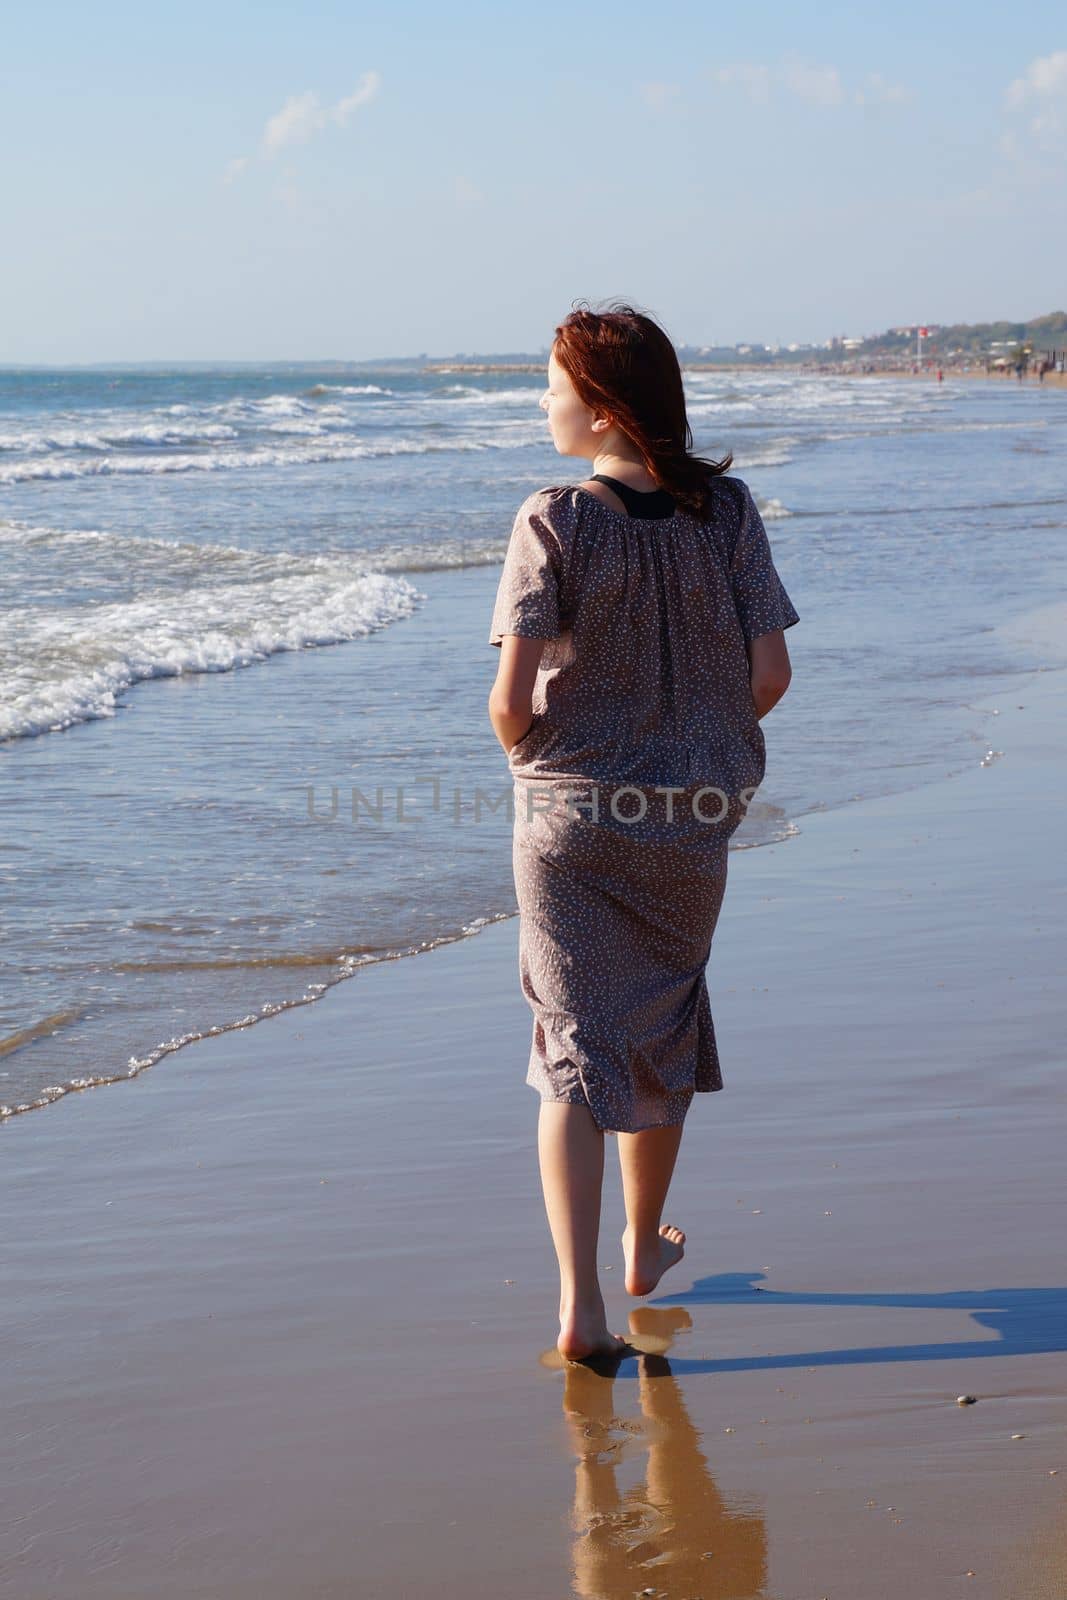 a red-haired barefoot teenage girl walks along the seashore along the water's edge by Annado